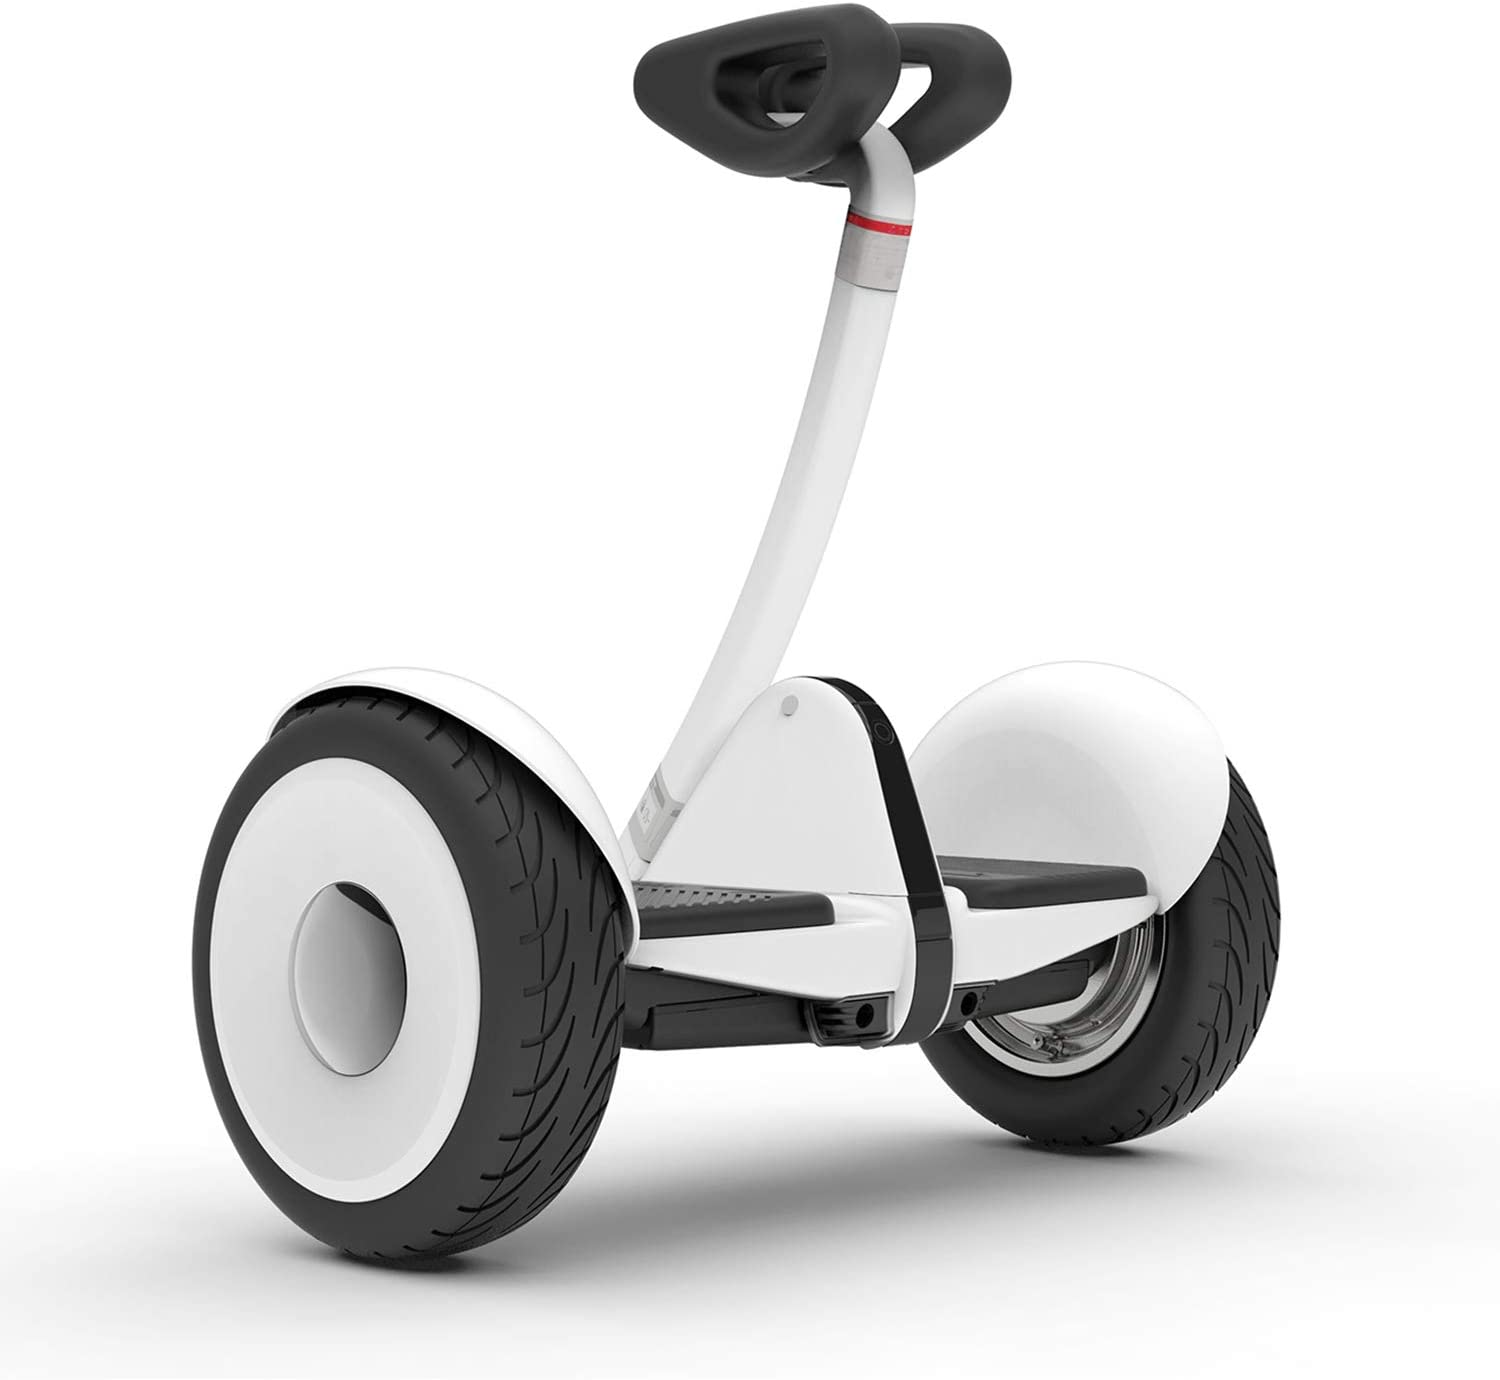 Segway Ninebot S Self-Balancing Electric Scooter With LED Light, Powerful And Portable, Compatible With Gokart Kit (White)